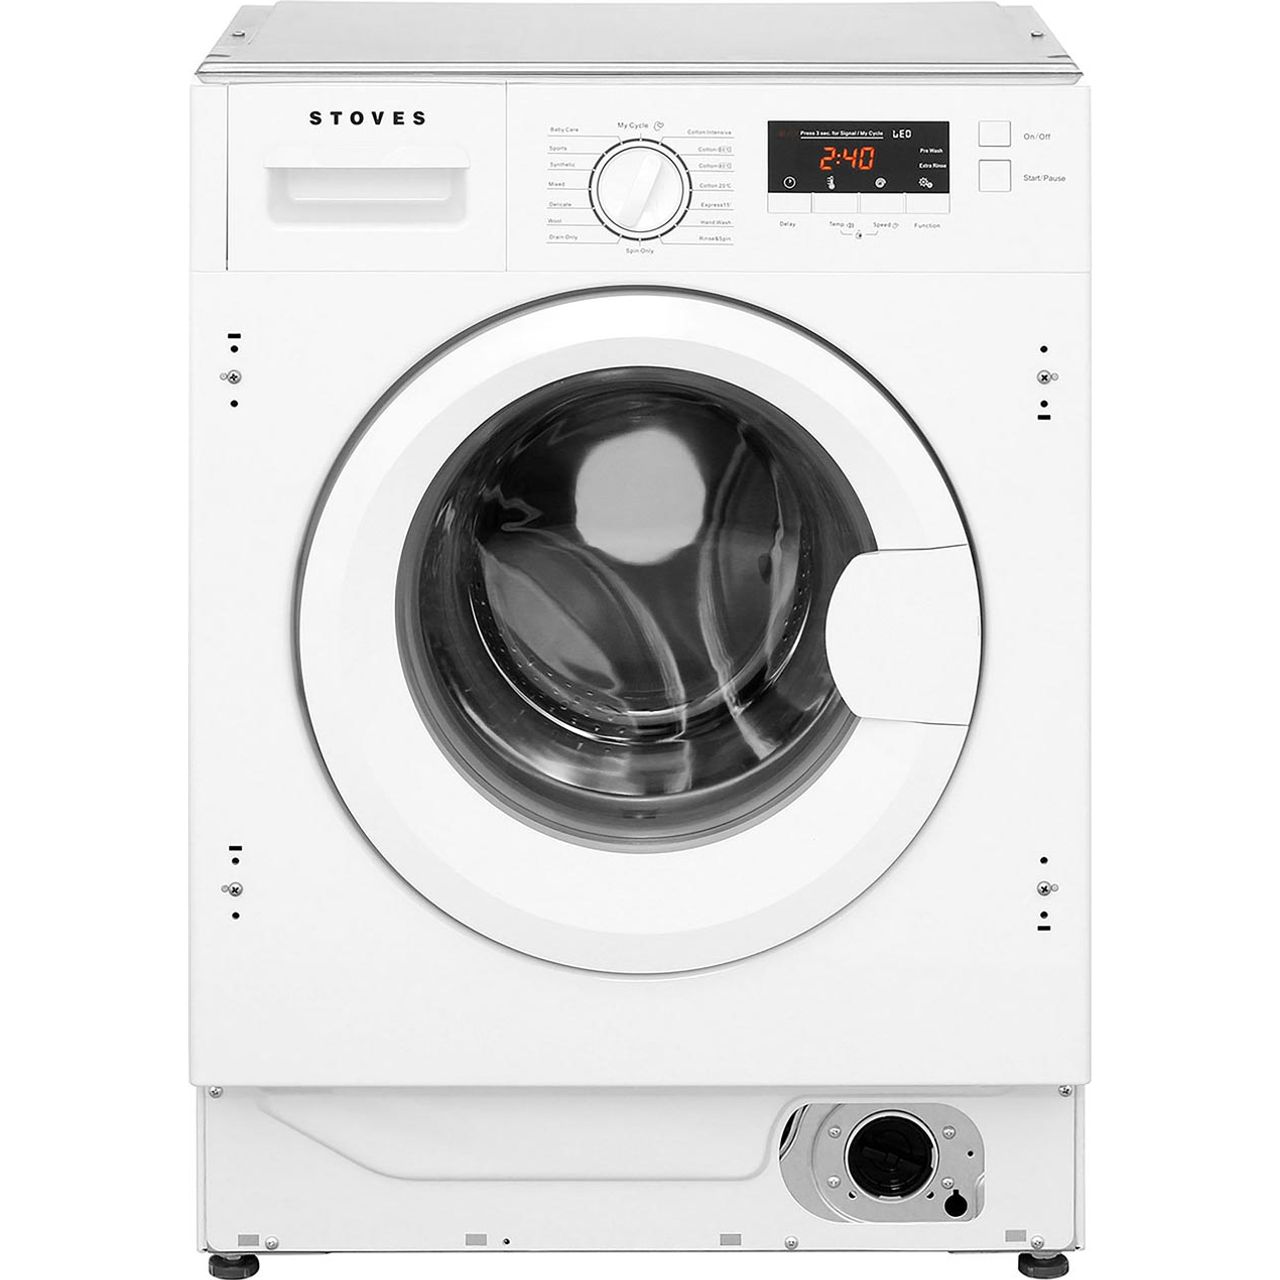 Stoves IWM8KG Integrated 8Kg Washing Machine with 1400 rpm Review